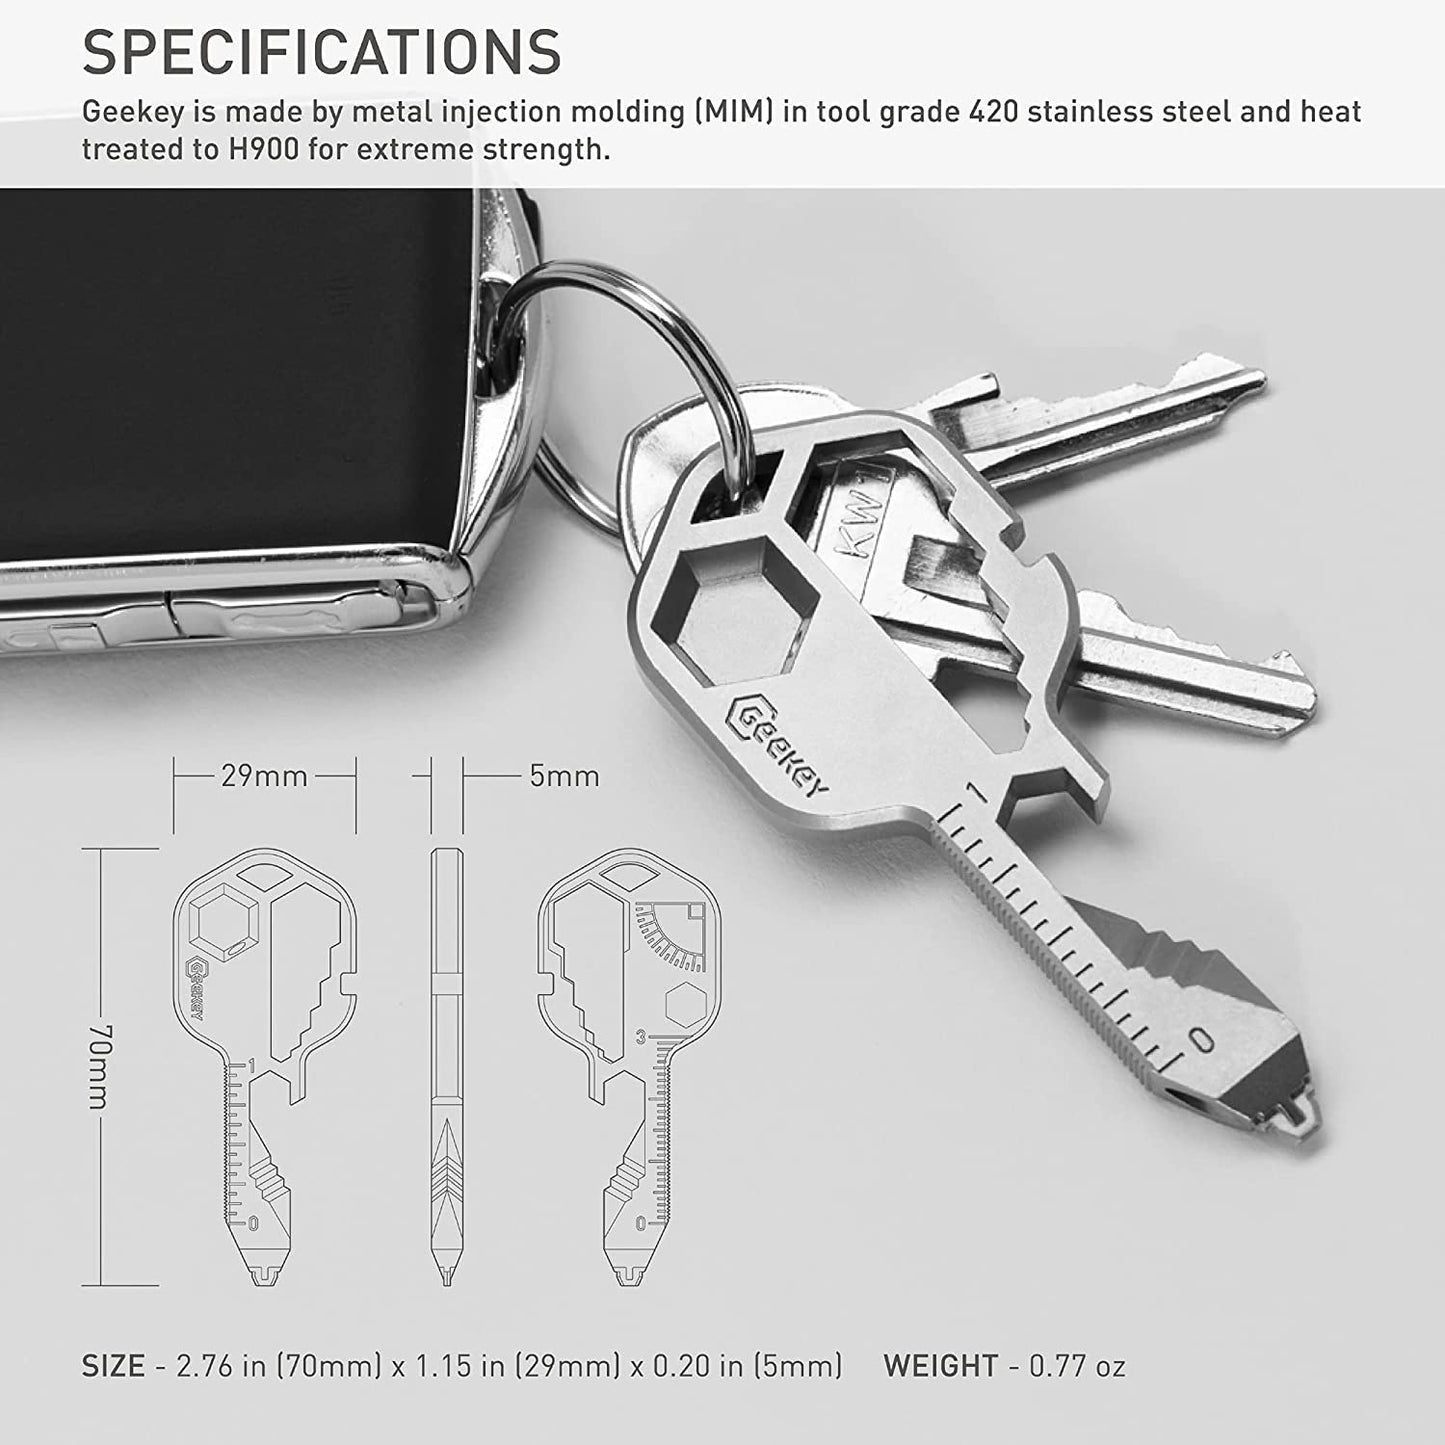 A Geekey 16-in-one multi tool attached to a set of keys.